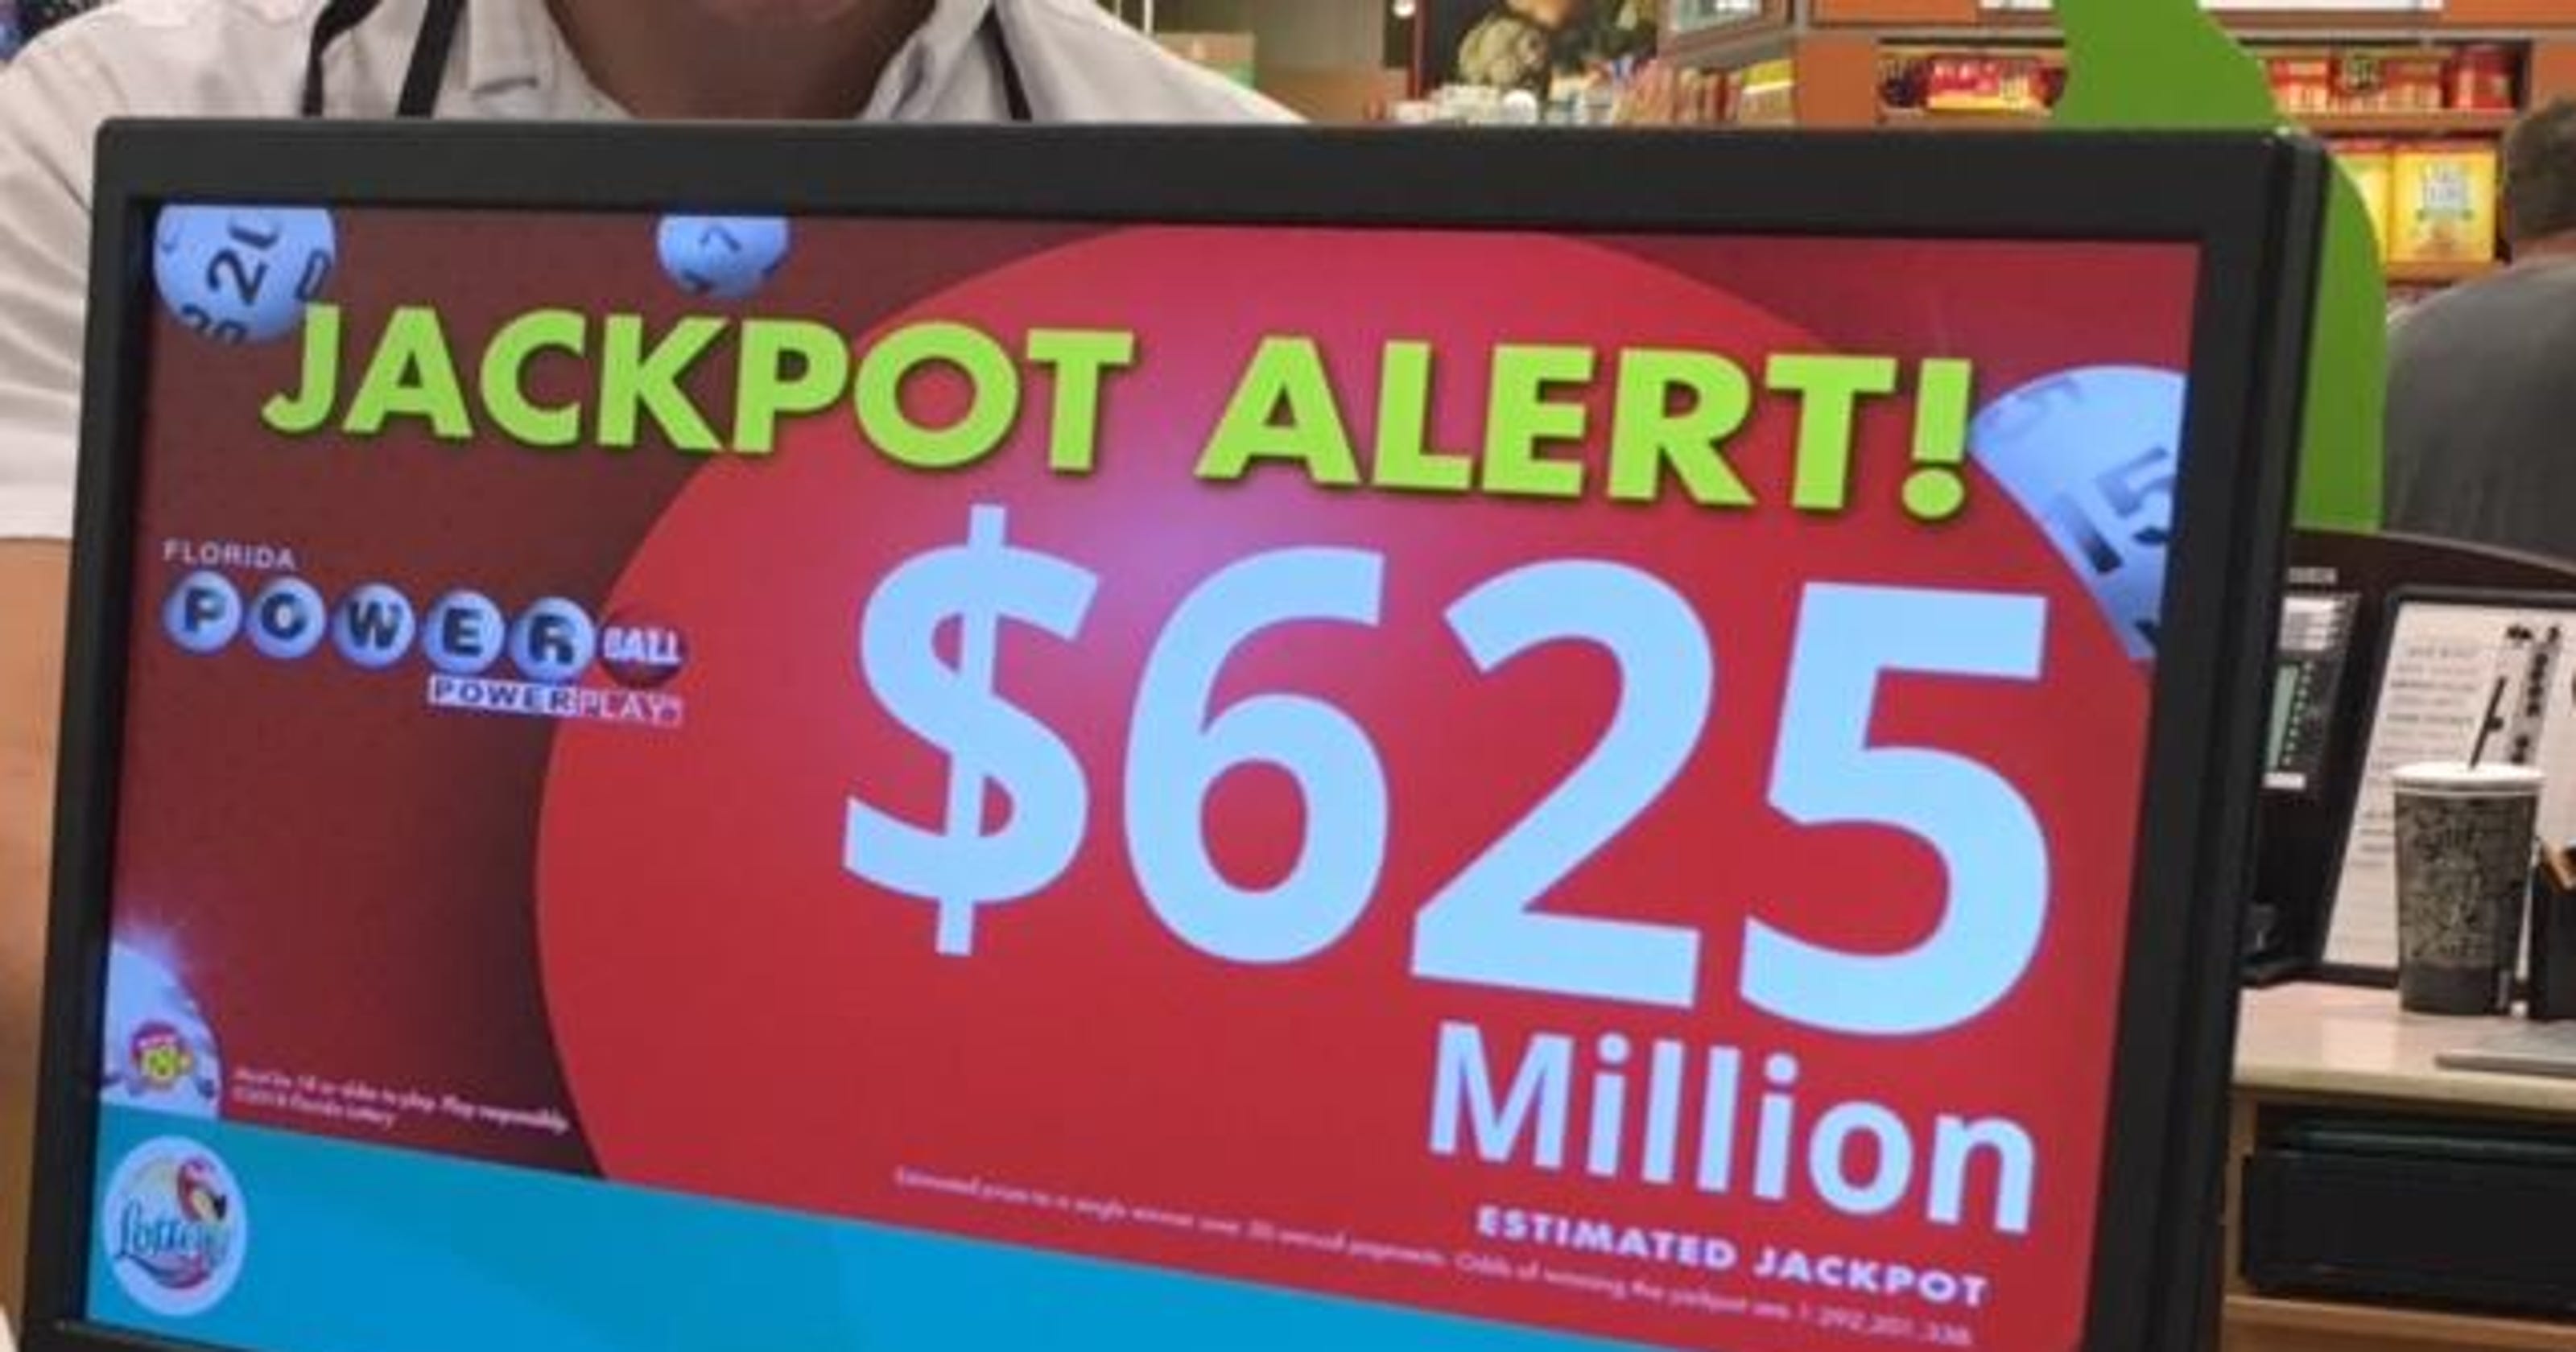 Powerball drawing Saturday is for a huge jackpot of 625 million